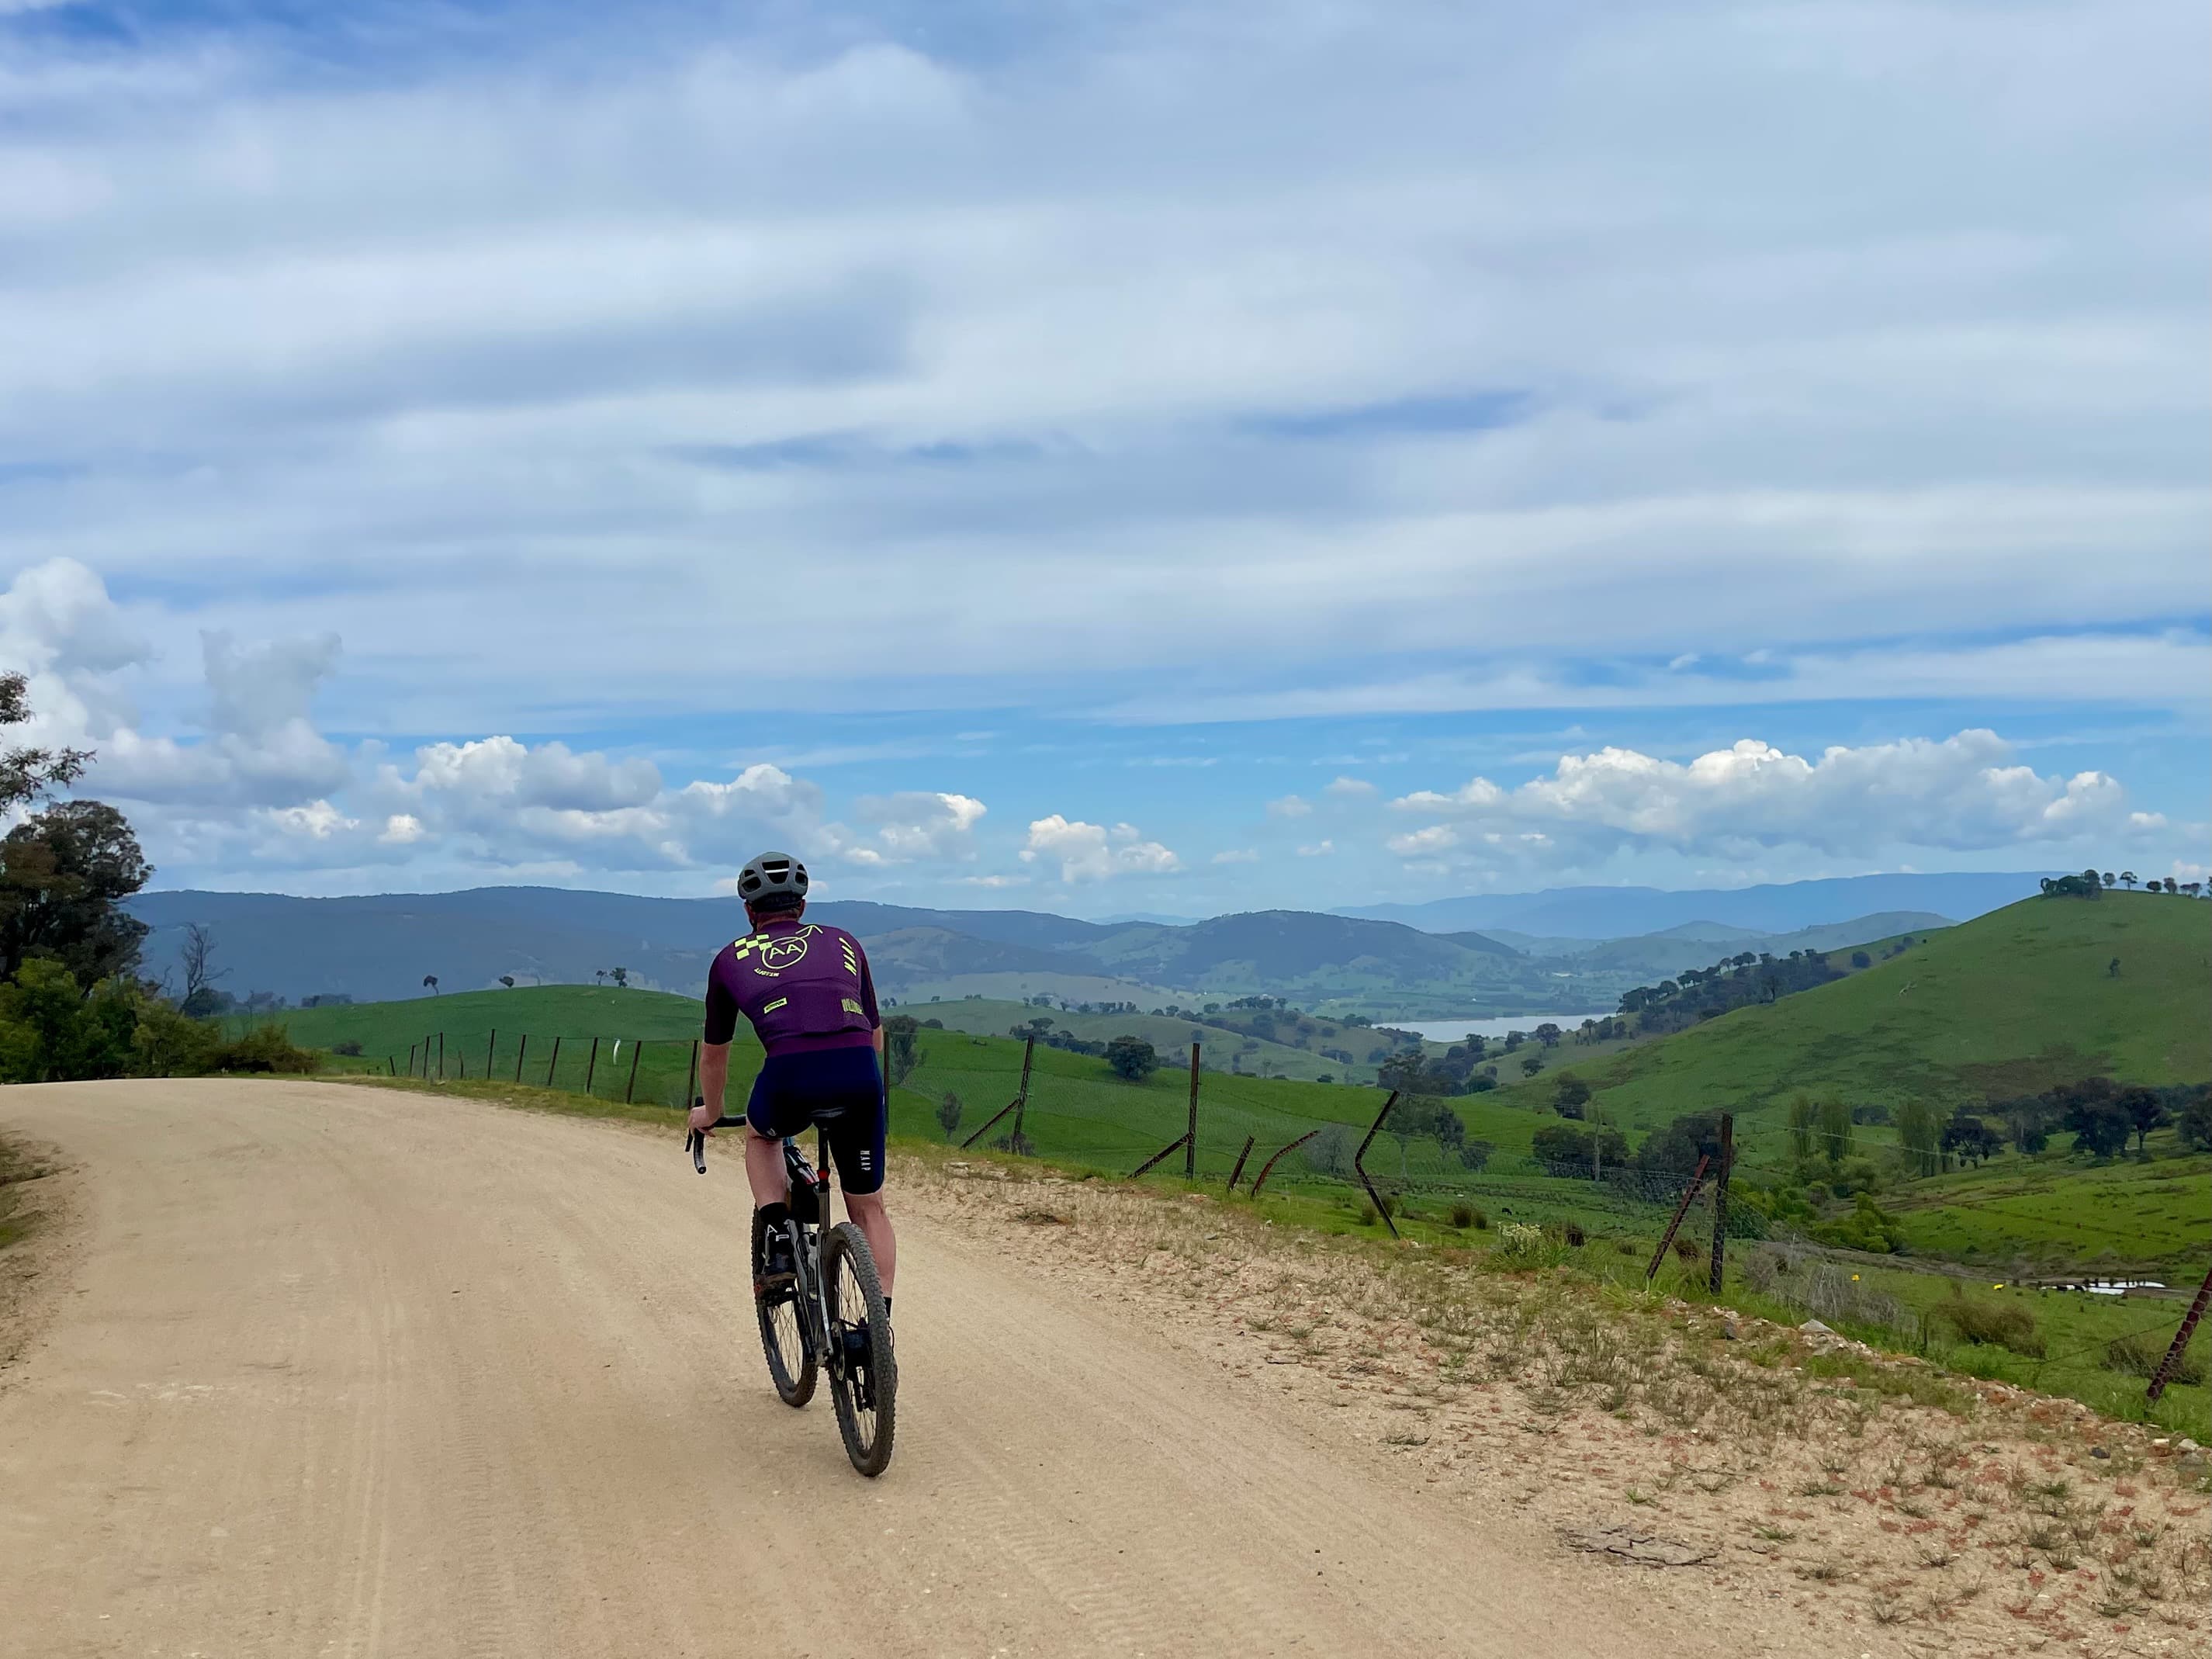 Cyclist riding on gravel road with expansive view of surrounding mountains and lake